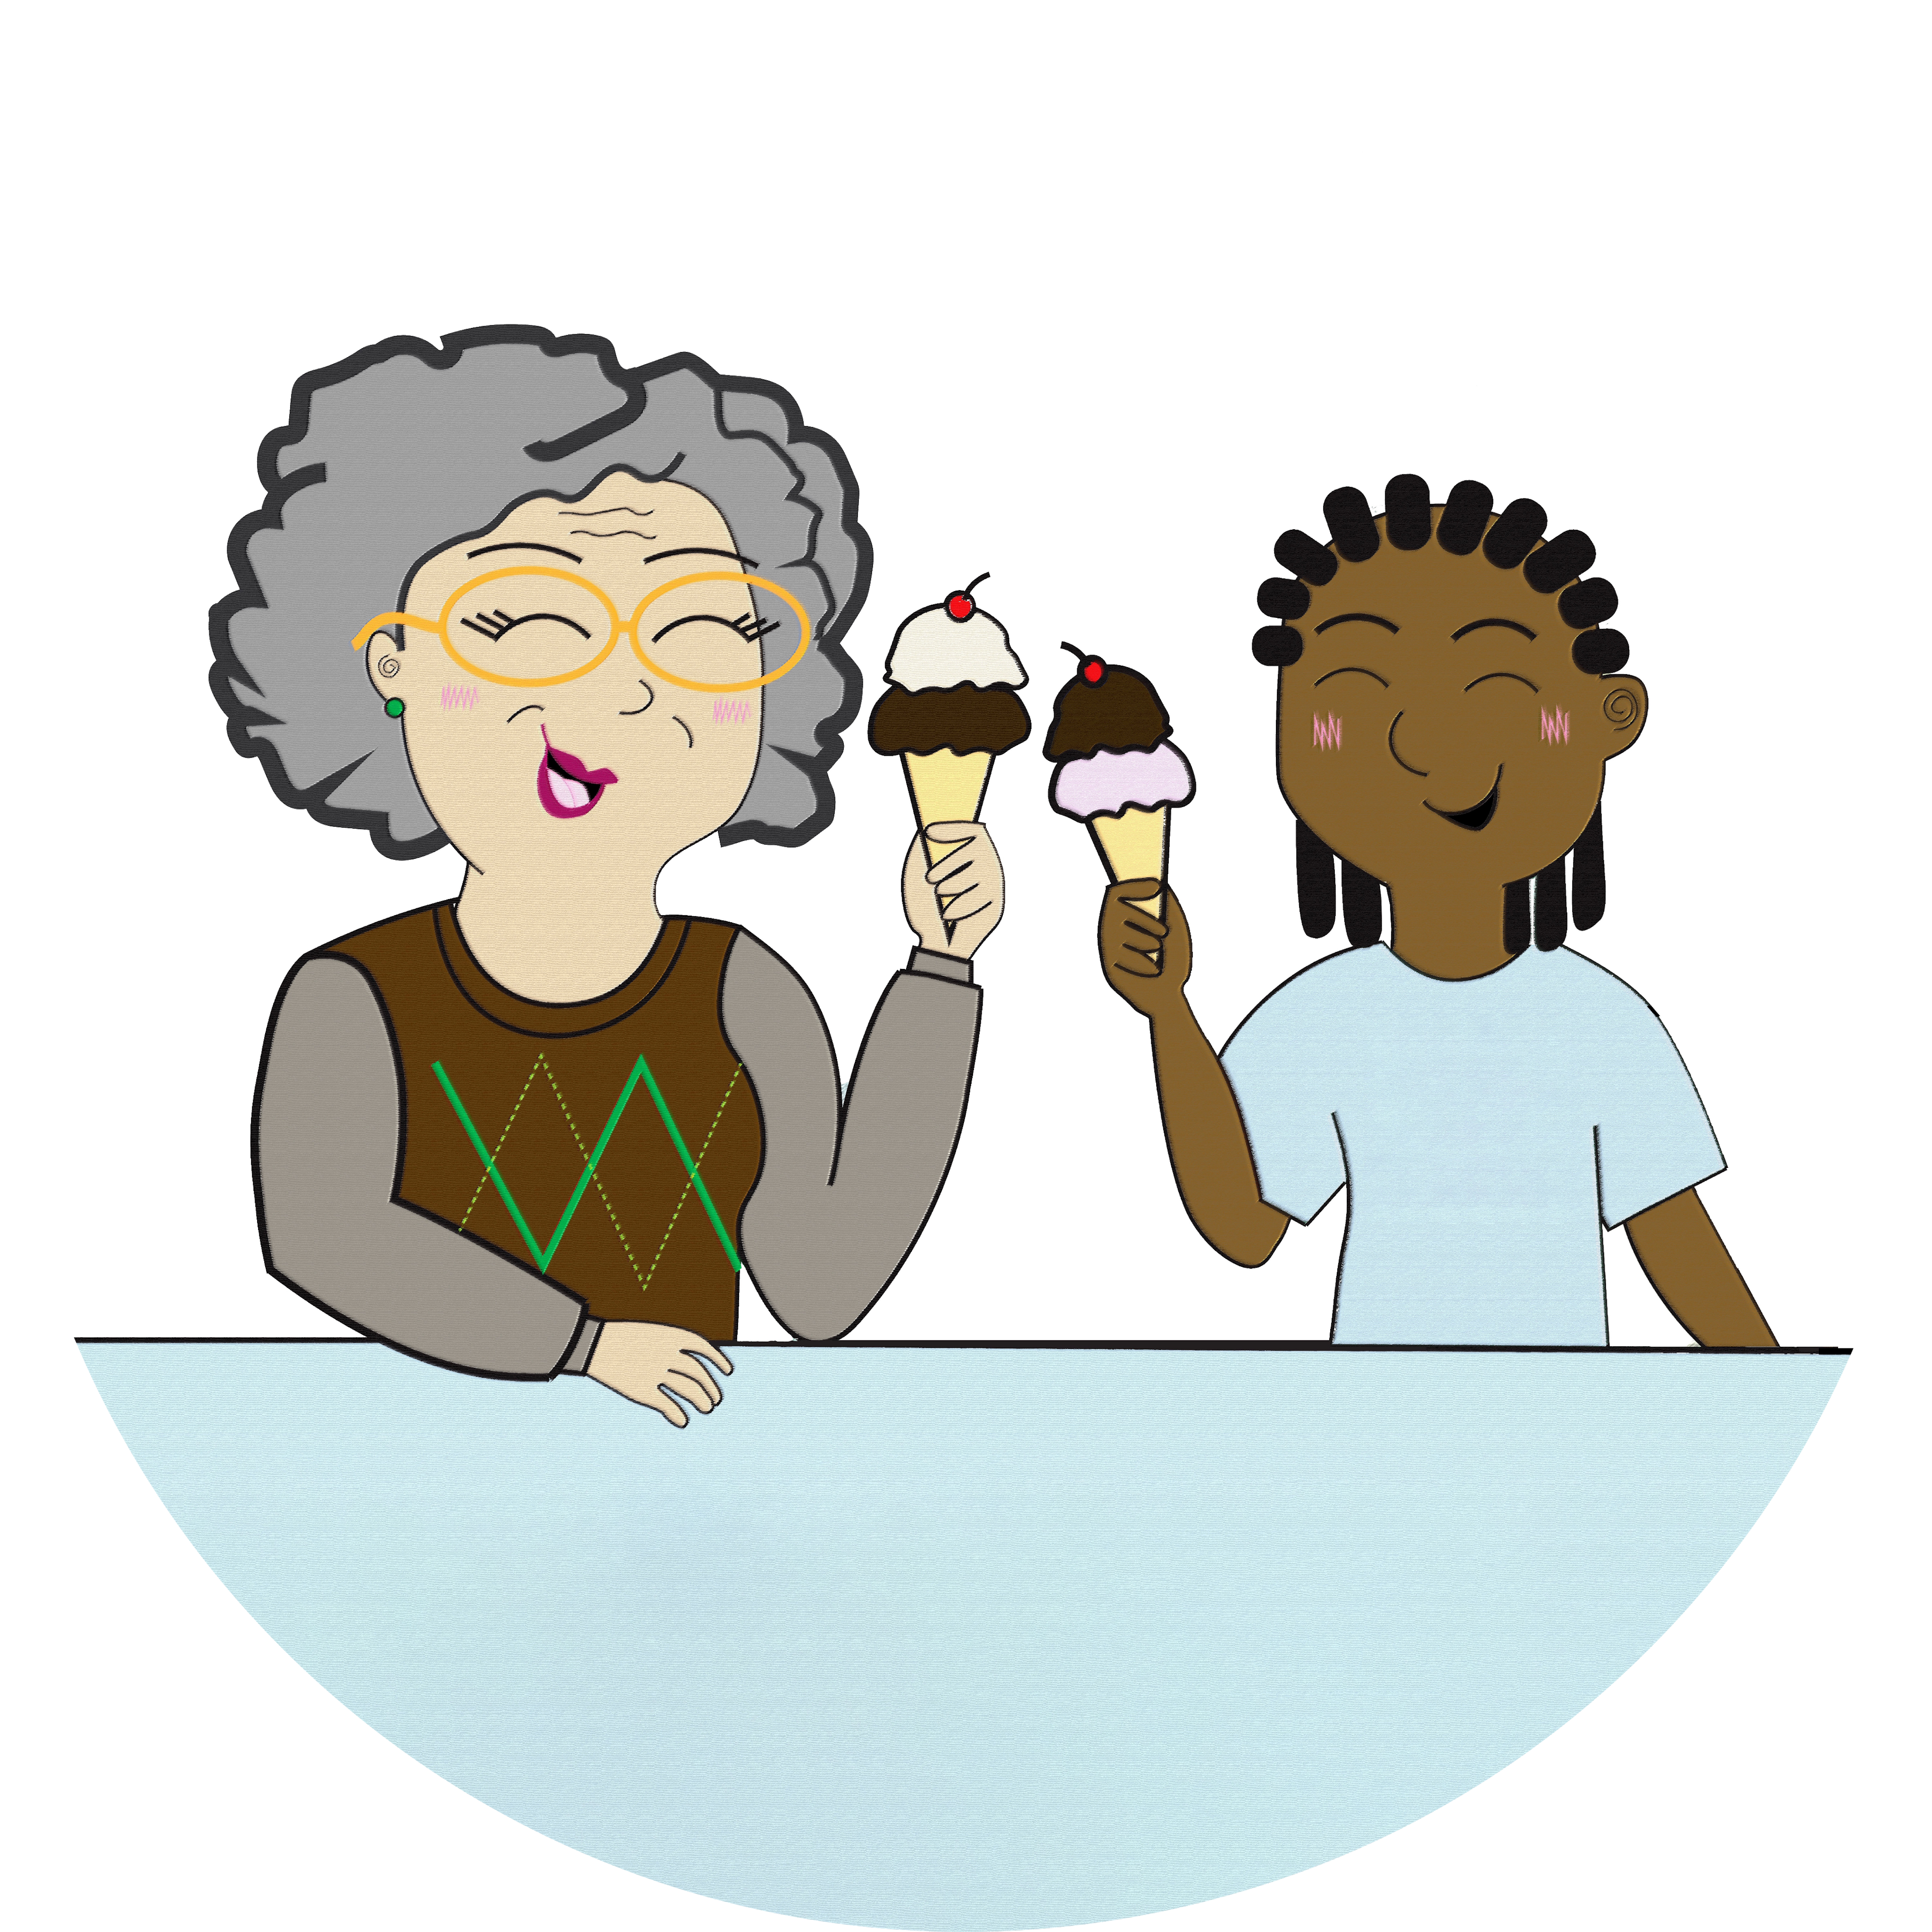 A drawing of an older woman and a young boy enjoying ice cream cones together.